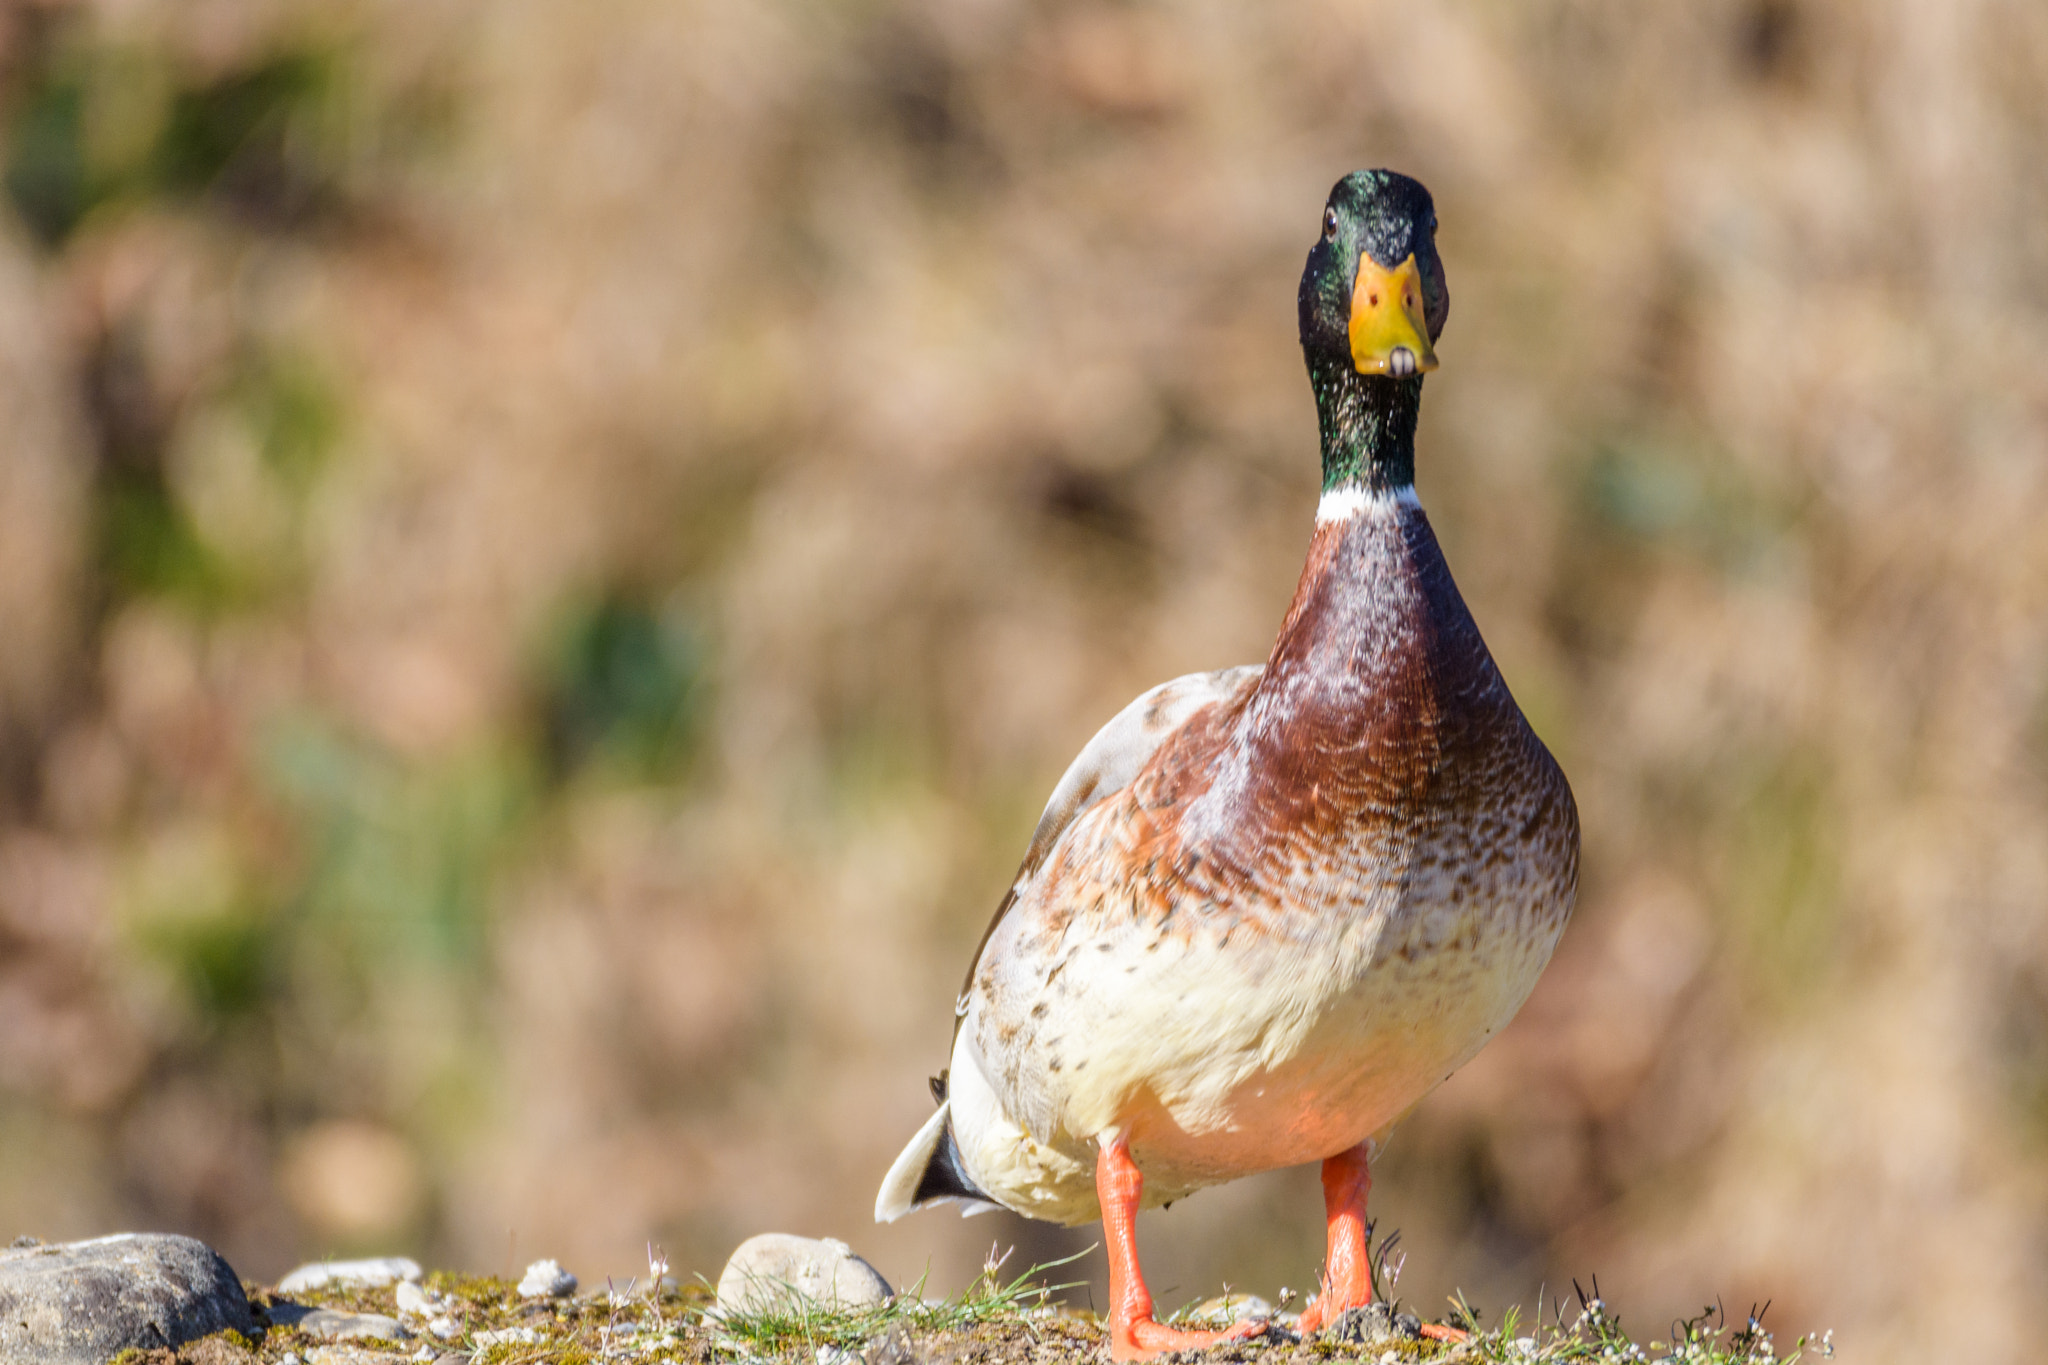 Nikon D7200 + Sigma 150-600mm F5-6.3 DG OS HSM | C sample photo. Duck on a small hill photography